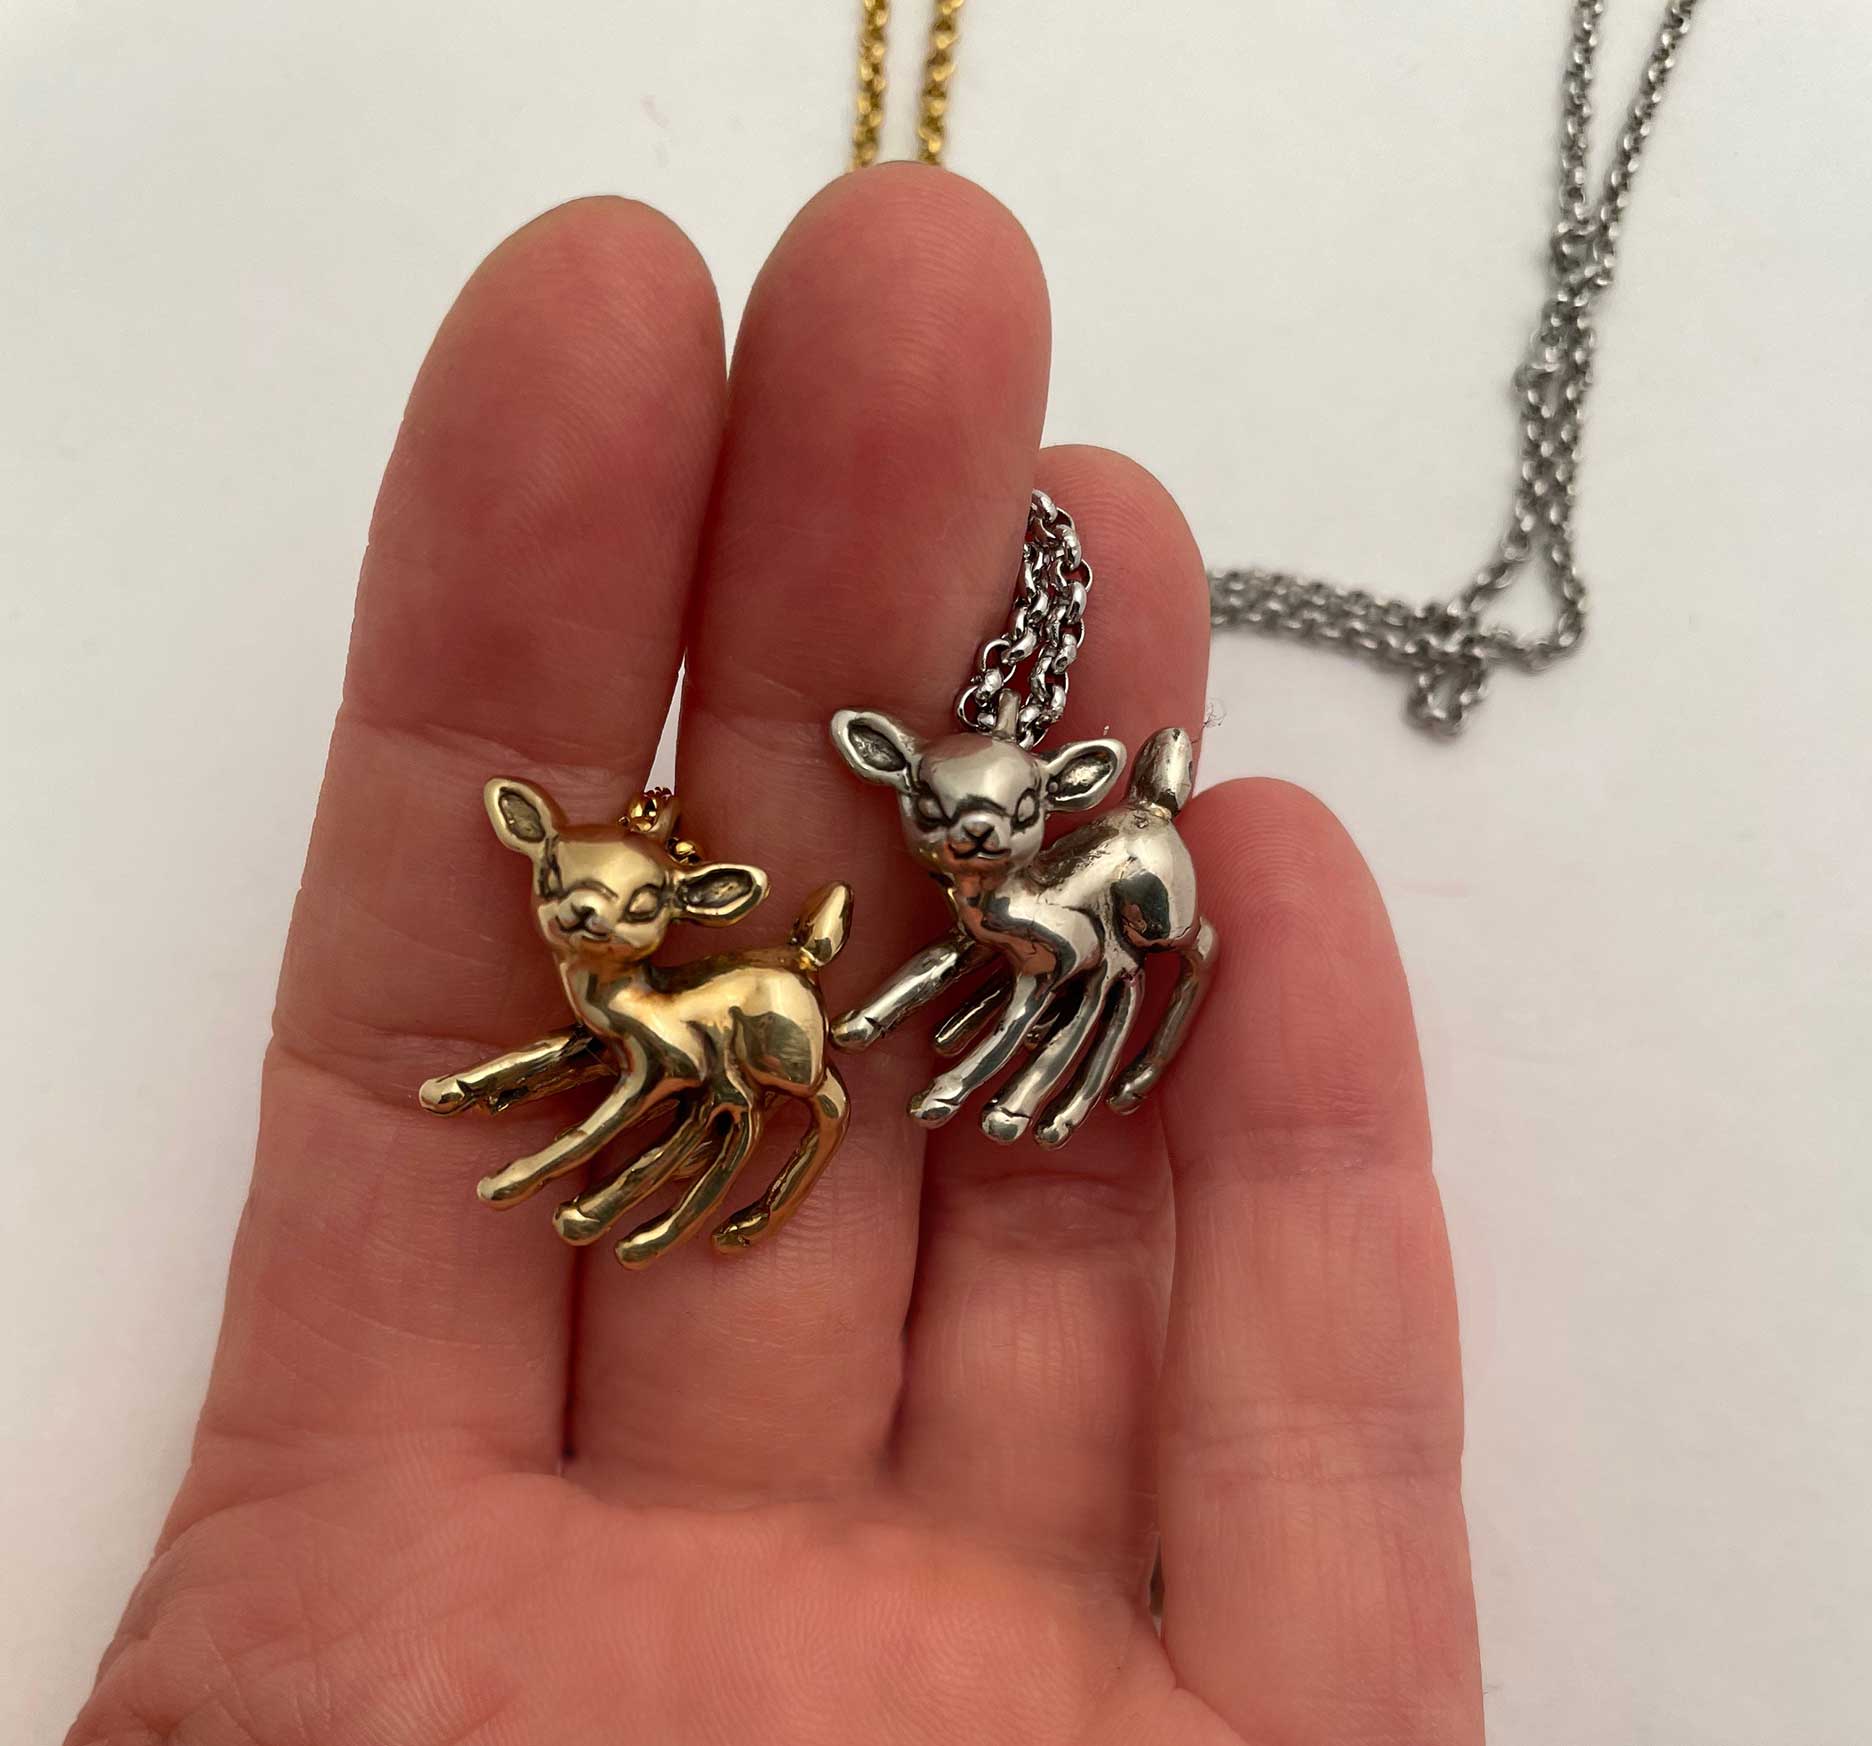 8 Legged Deer Necklace Ready to Ship